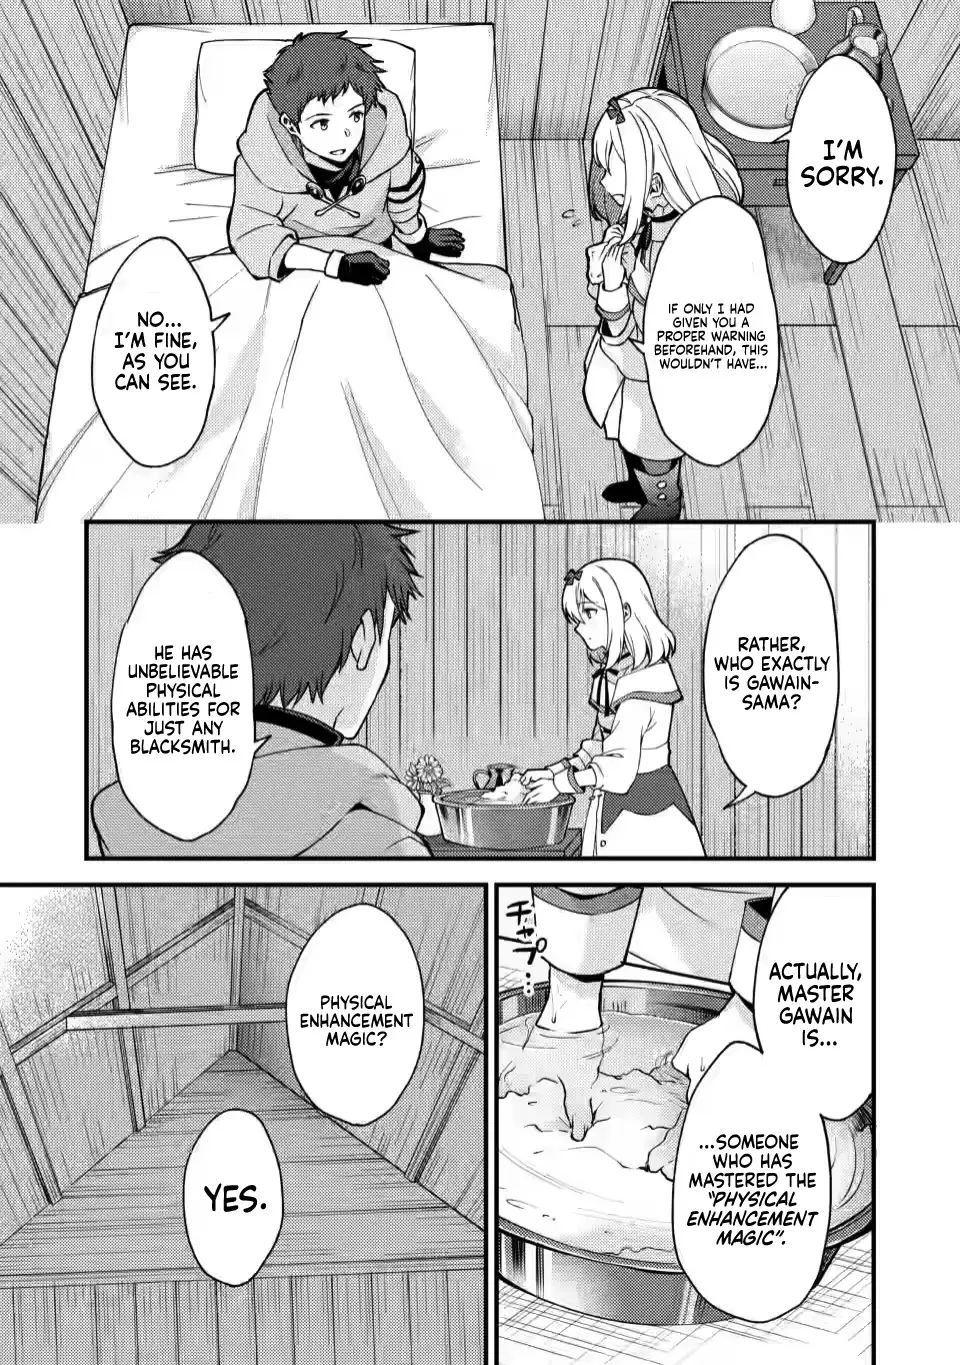 A Sword Master Childhood Friend Power Harassed Me Harshly, So I Broke Off Our Relationship And Make A Fresh Start At The Frontier As A Magic Swordsman. - 11 page 21